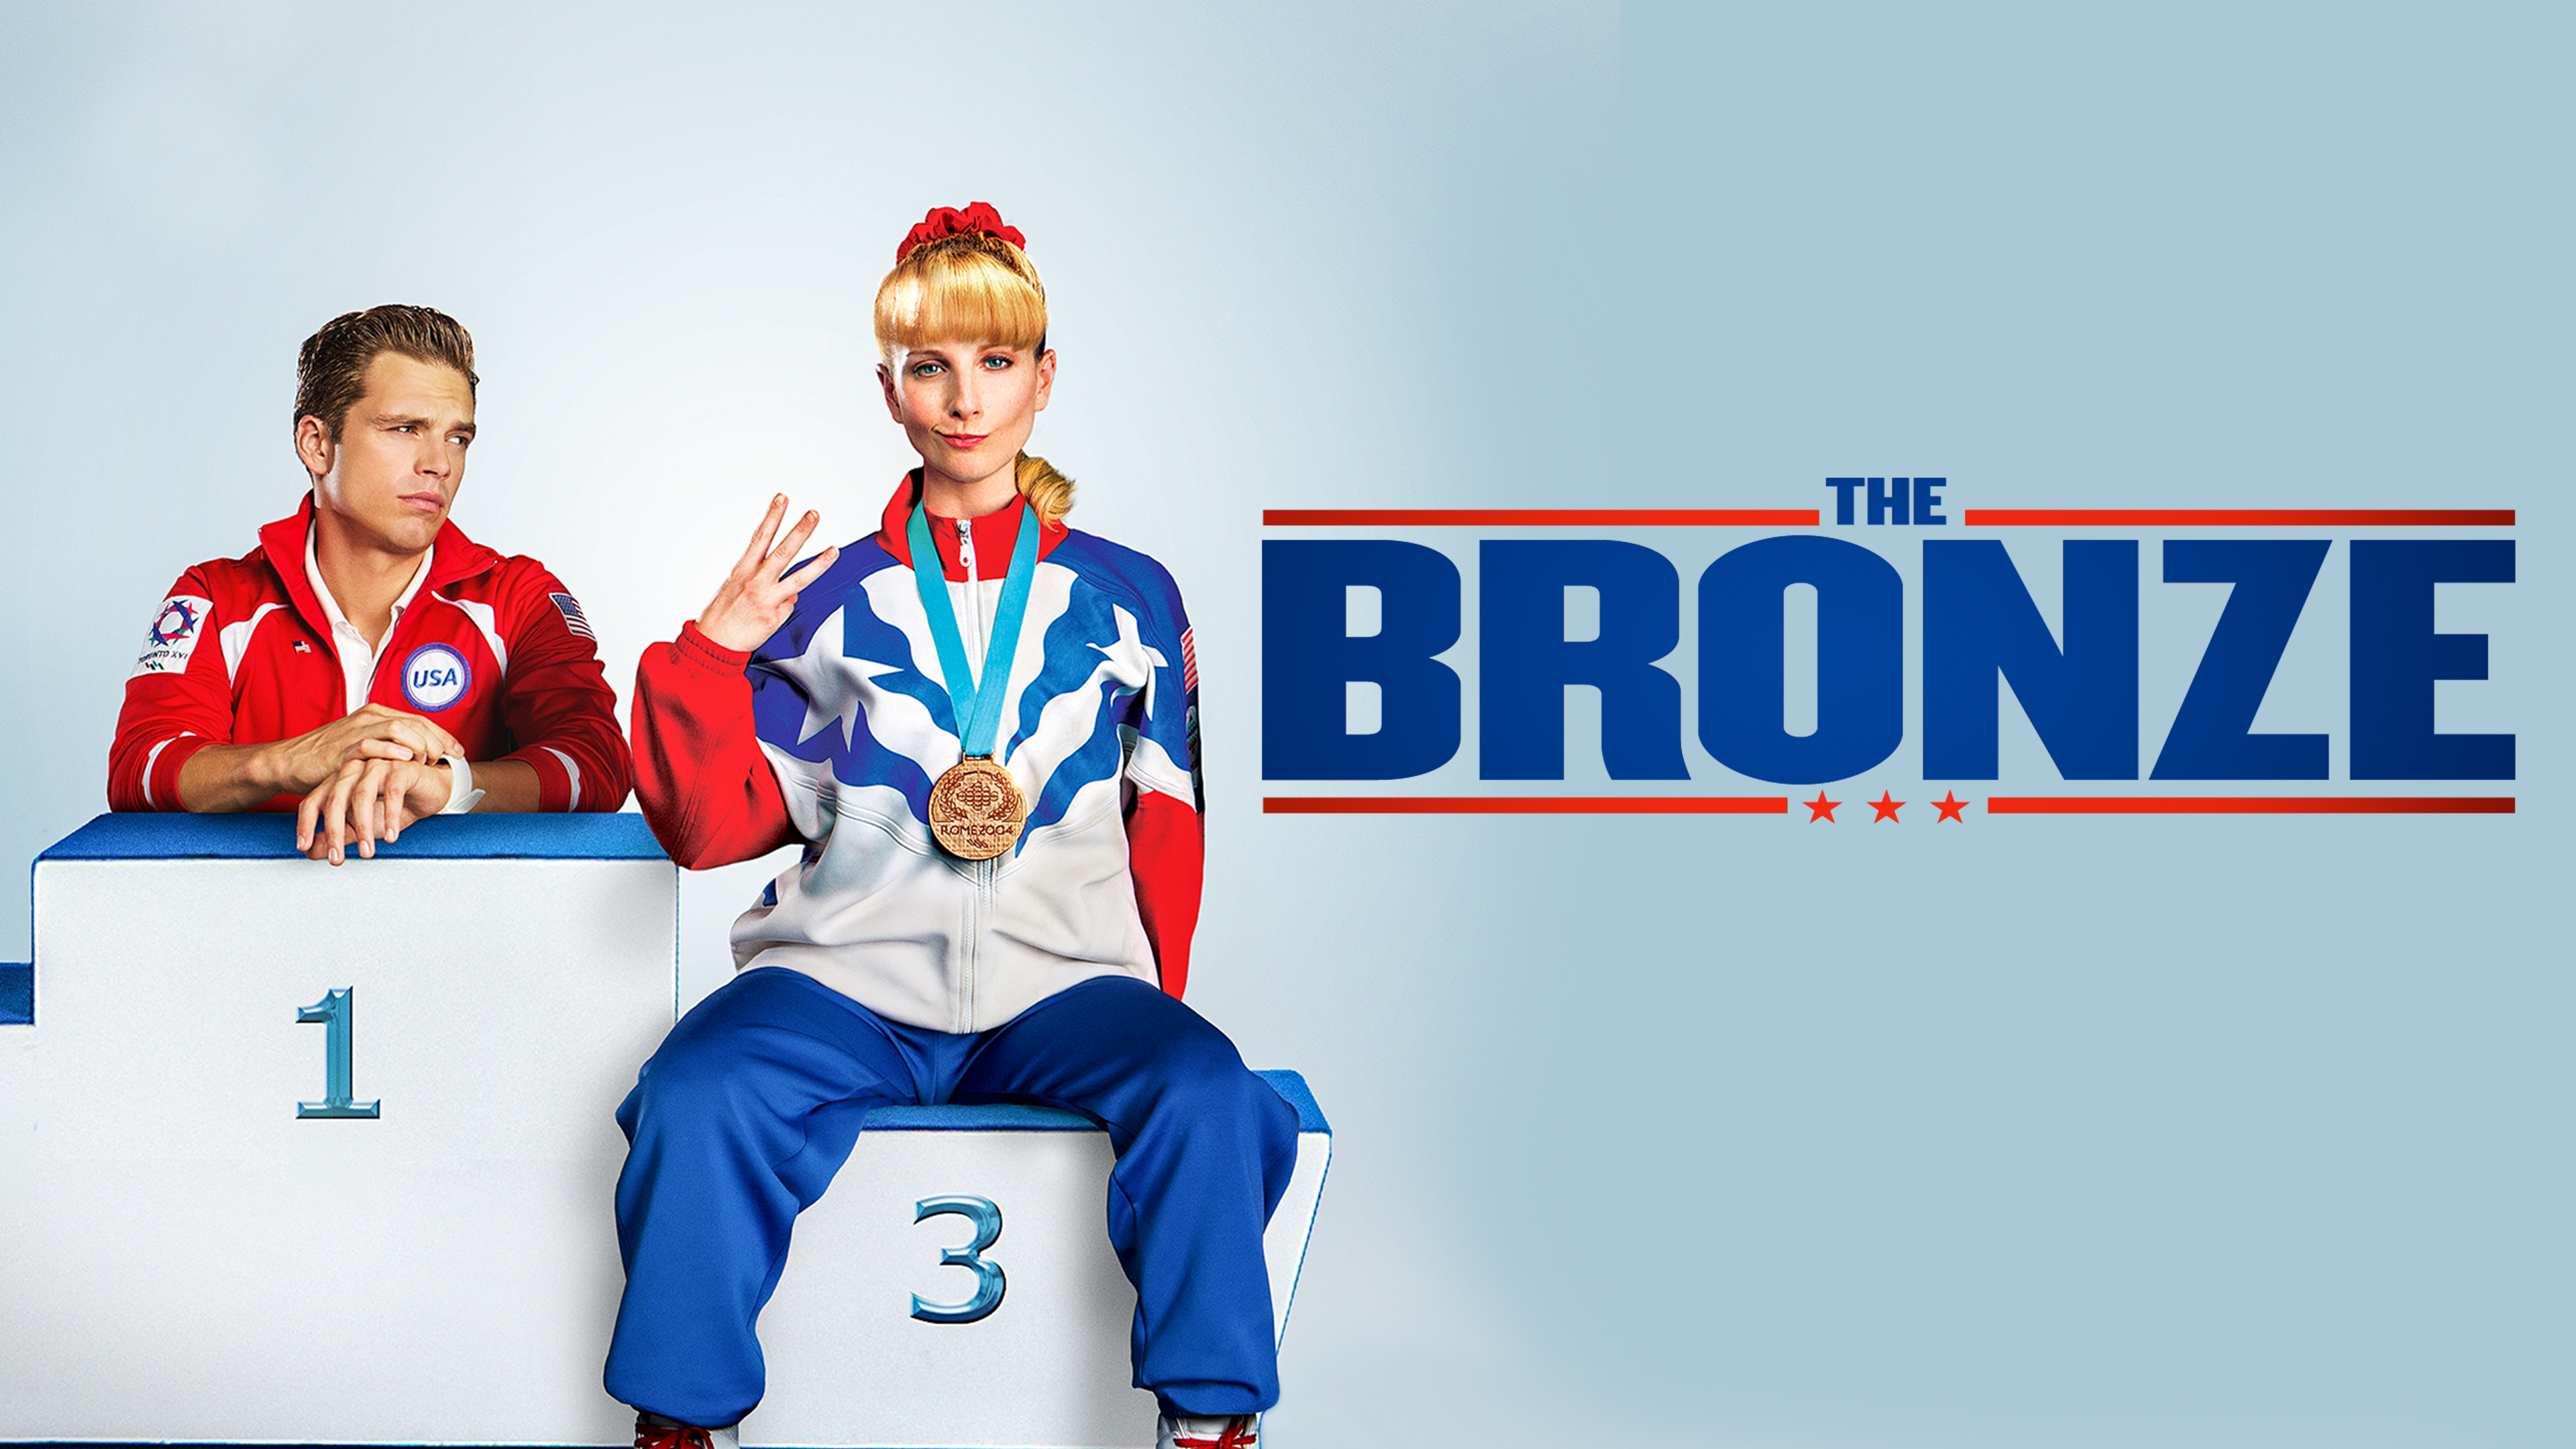 Title art for The Bronze